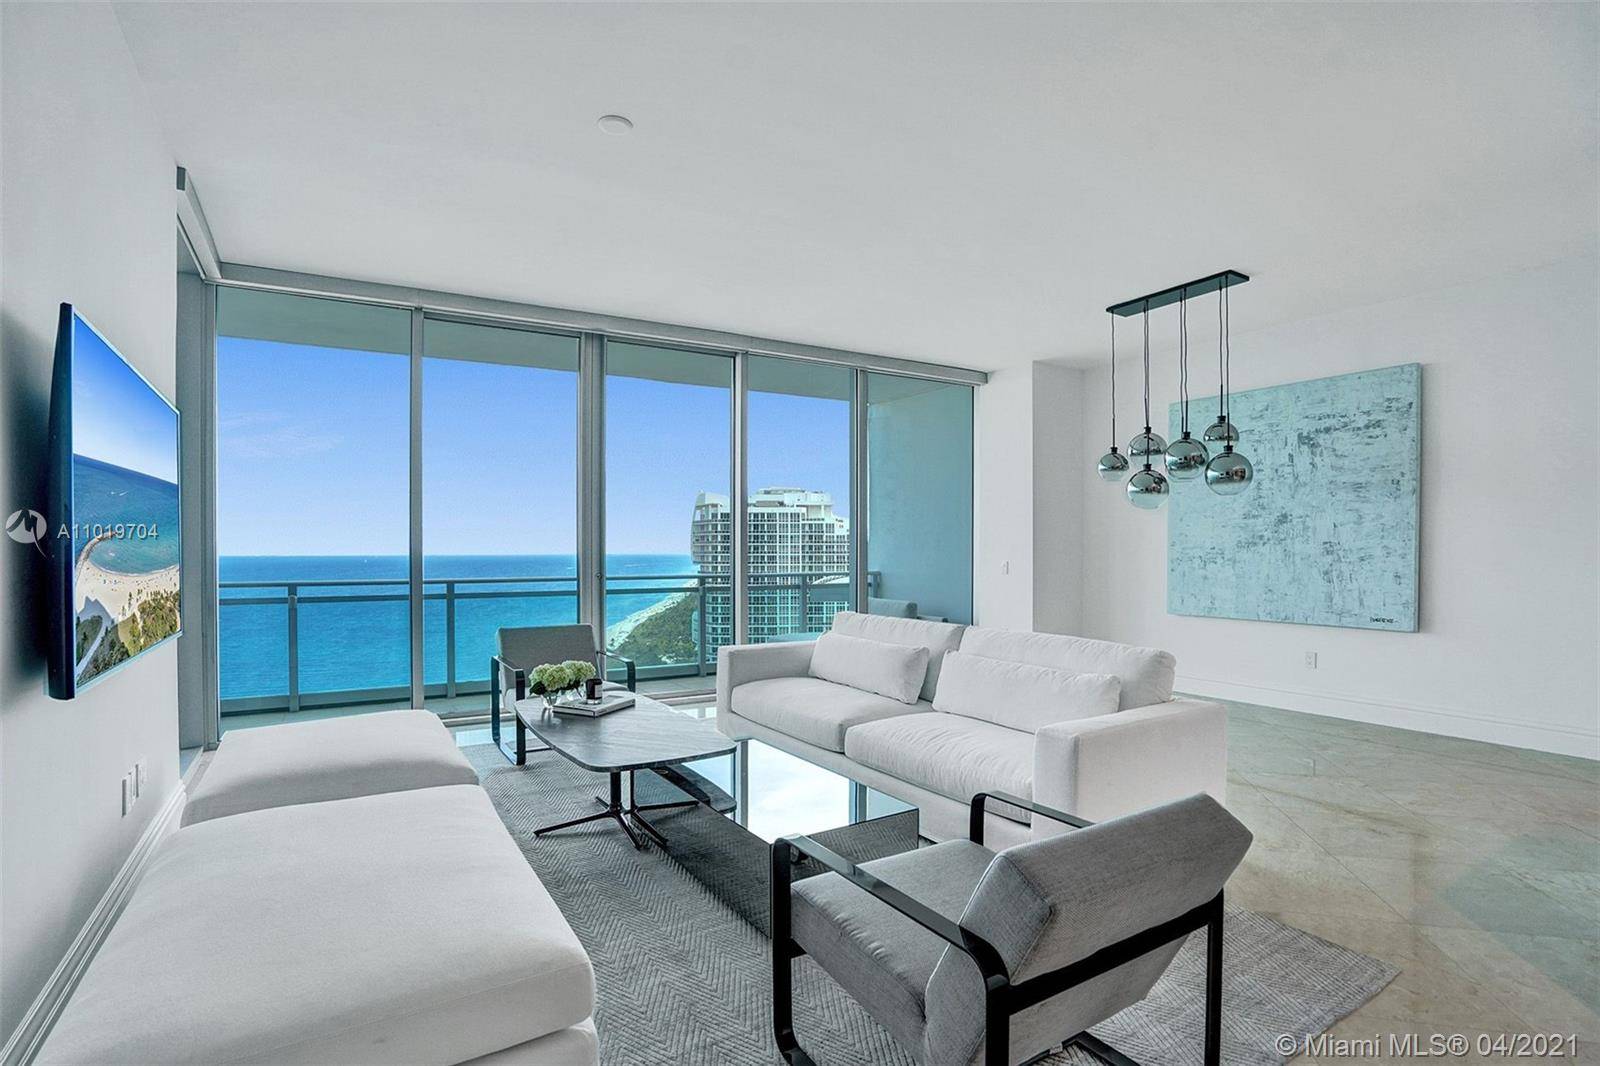 Luxurious waterfront residence with stunning south east, direct ocean views that has just been professionally renovated.